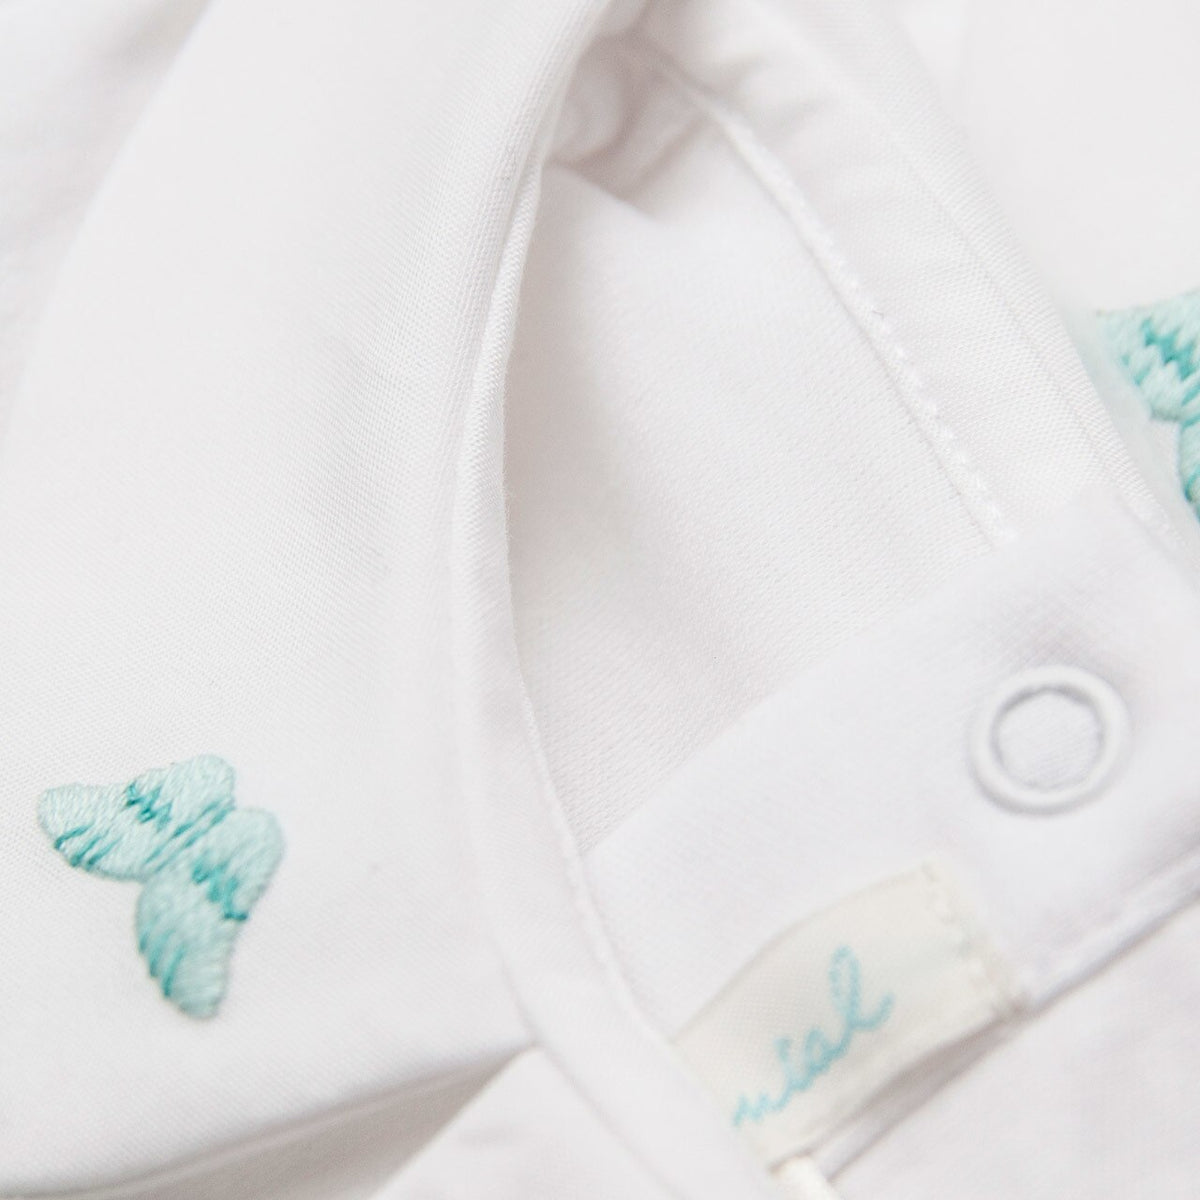 My First Angel Wing Embroidered Onesie Set